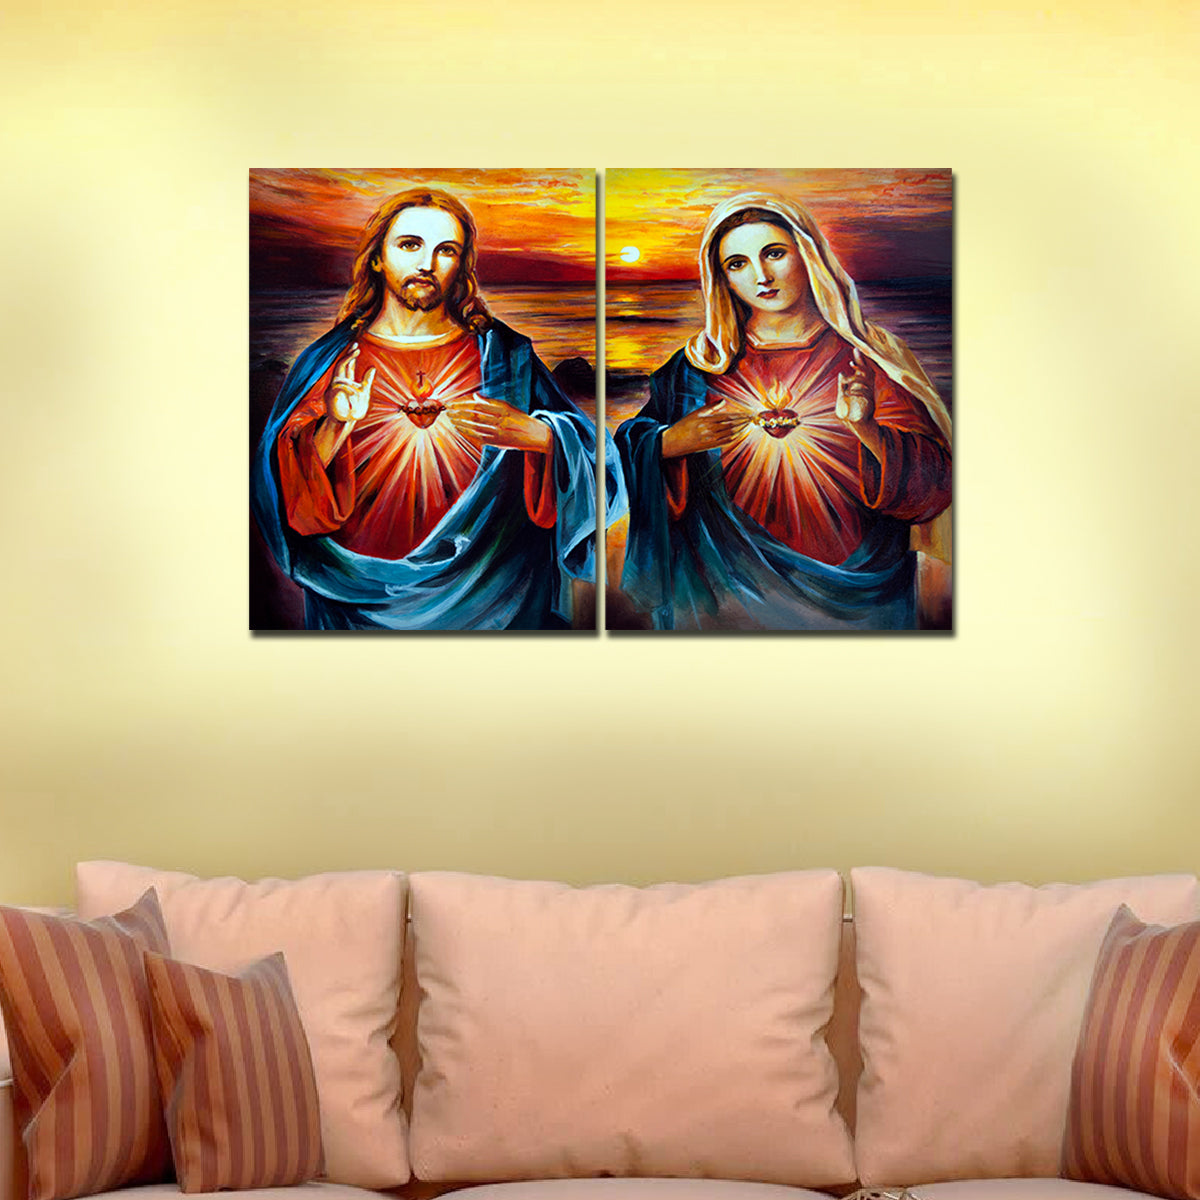 Wall Painting of Mother Mary and Jesus